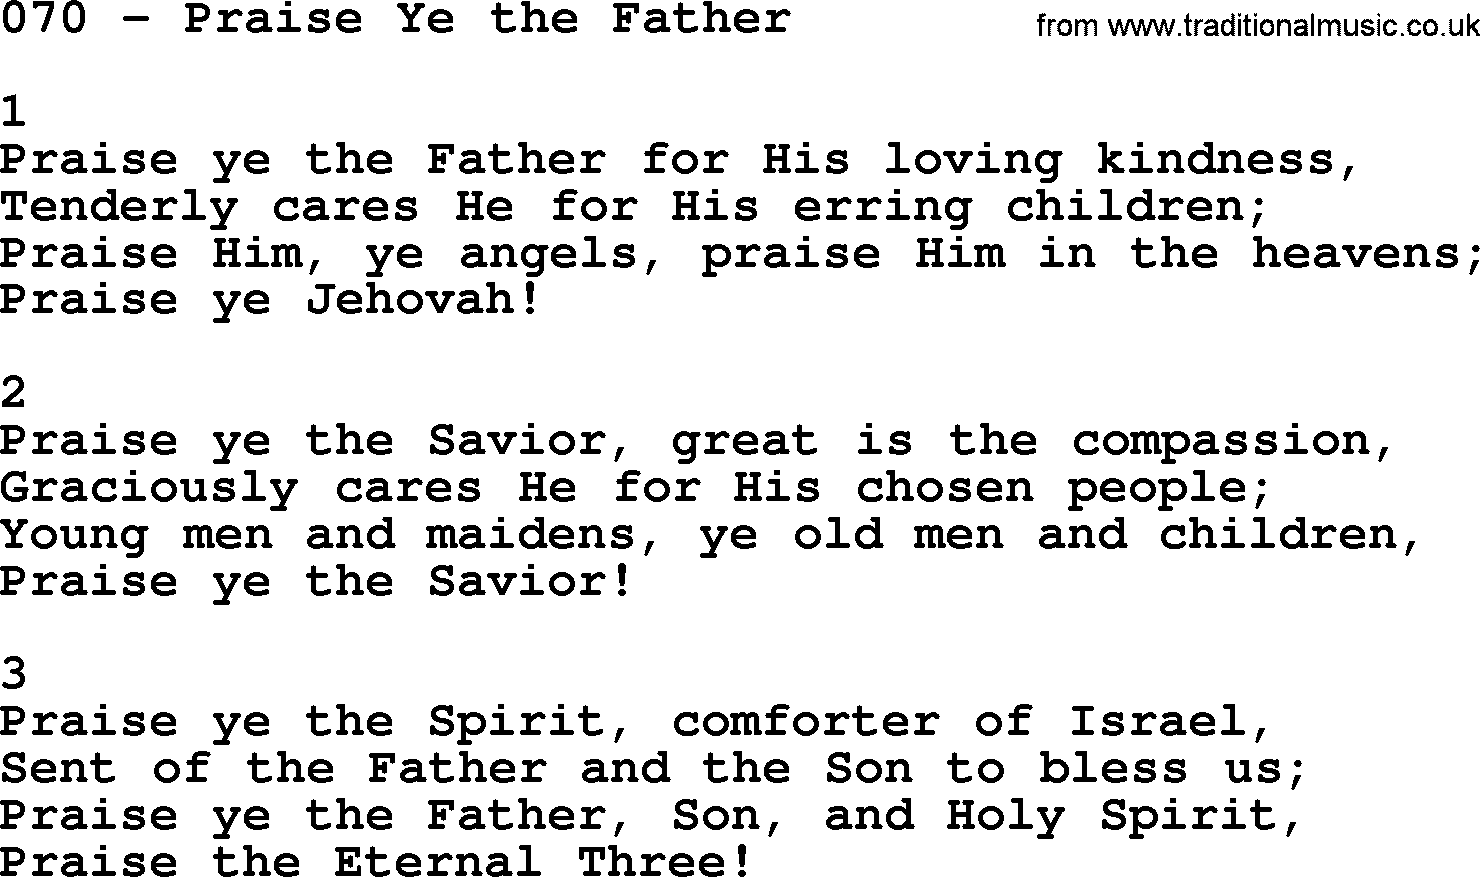 Complete Adventis Hymnal, title: 070-Praise Ye The Father, with lyrics, midi, mp3, powerpoints(PPT) and PDF,